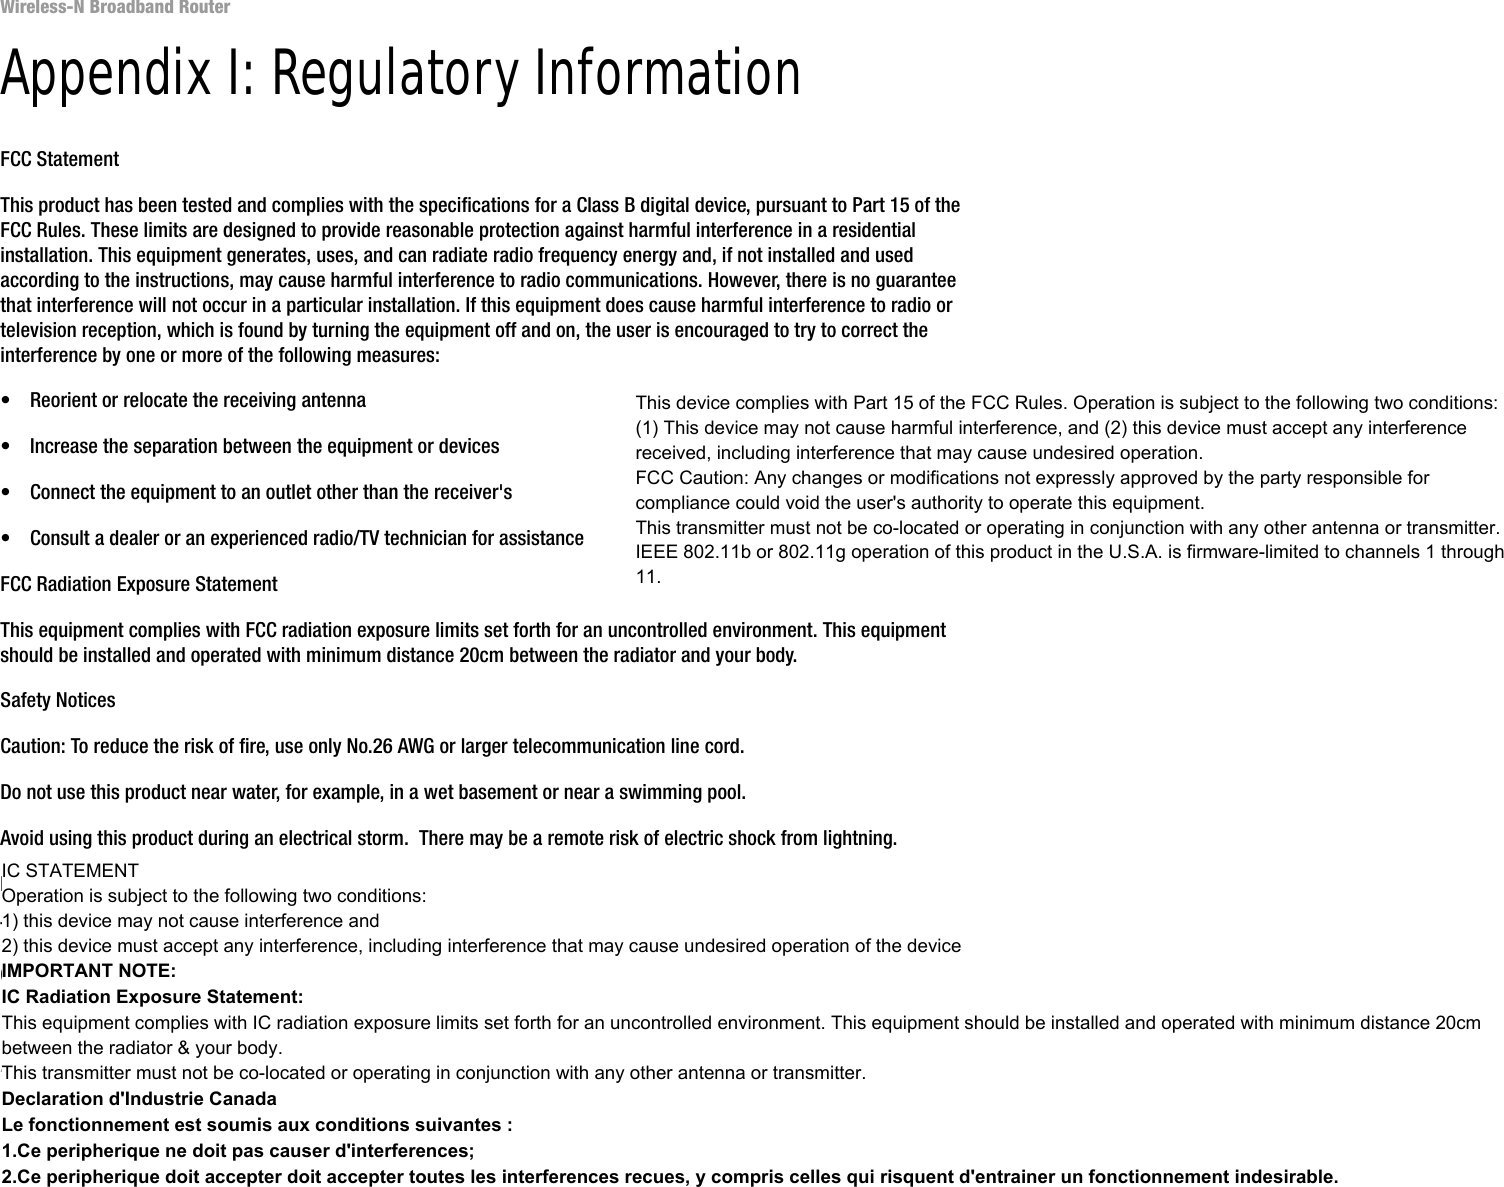 78Appendix I: Regulatory InformationWireless-N Broadband RouterAppendix I: Regulatory InformationFCC StatementThis product has been tested and complies with the specifications for a Class B digital device, pursuant to Part 15 of the FCC Rules. These limits are designed to provide reasonable protection against harmful interference in a residential installation. This equipment generates, uses, and can radiate radio frequency energy and, if not installed and used according to the instructions, may cause harmful interference to radio communications. However, there is no guarantee that interference will not occur in a particular installation. If this equipment does cause harmful interference to radio or television reception, which is found by turning the equipment off and on, the user is encouraged to try to correct the interference by one or more of the following measures:• Reorient or relocate the receiving antenna• Increase the separation between the equipment or devices• Connect the equipment to an outlet other than the receiver&apos;s• Consult a dealer or an experienced radio/TV technician for assistanceFCC Radiation Exposure StatementThis equipment complies with FCC radiation exposure limits set forth for an uncontrolled environment. This equipment should be installed and operated with minimum distance 20cm between the radiator and your body.Safety NoticesCaution: To reduce the risk of fire, use only No.26 AWG or larger telecommunication line cord.Do not use this product near water, for example, in a wet basement or near a swimming pool.Avoid using this product during an electrical storm.  There may be a remote risk of electric shock from lightning.Industry Canada (Canada)This device complies with Industry Canada ICES-003 and RSS210 rules.Cet appareil est conforme aux normes NMB003 et RSS210 d&apos;Industrie Canada.This device complies with Part 15 of the FCC Rules. Operation is subject to the following two conditions: (1) This device may not cause harmful interference, and (2) this device must accept any interference received, including interference that may cause undesired operation.FCC Caution: Any changes or modifications not expressly approved by the party responsible for compliance could void the user&apos;s authority to operate this equipment.This transmitter must not be co-located or operating in conjunction with any other antenna or transmitter.IEEE 802.11b or 802.11g operation of this product in the U.S.A. is firmware-limited to channels 1 through 11.IC STATEMENTOperation is subject to the following two conditions:1) this device may not cause interference and2) this device must accept any interference, including interference that may cause undesired operation of the deviceIMPORTANT NOTE:IC Radiation Exposure Statement:This equipment complies with IC radiation exposure limits set forth for an uncontrolled environment. This equipment should be installed and operated with minimum distance 20cm between the radiator &amp; your body.This transmitter must not be co-located or operating in conjunction with any other antenna or transmitter.Declaration d&apos;Industrie CanadaLe fonctionnement est soumis aux conditions suivantes : 1.Ce peripherique ne doit pas causer d&apos;interferences; 2.Ce peripherique doit accepter doit accepter toutes les interferences recues, y compris celles qui risquent d&apos;entrainer un fonctionnement indesirable.